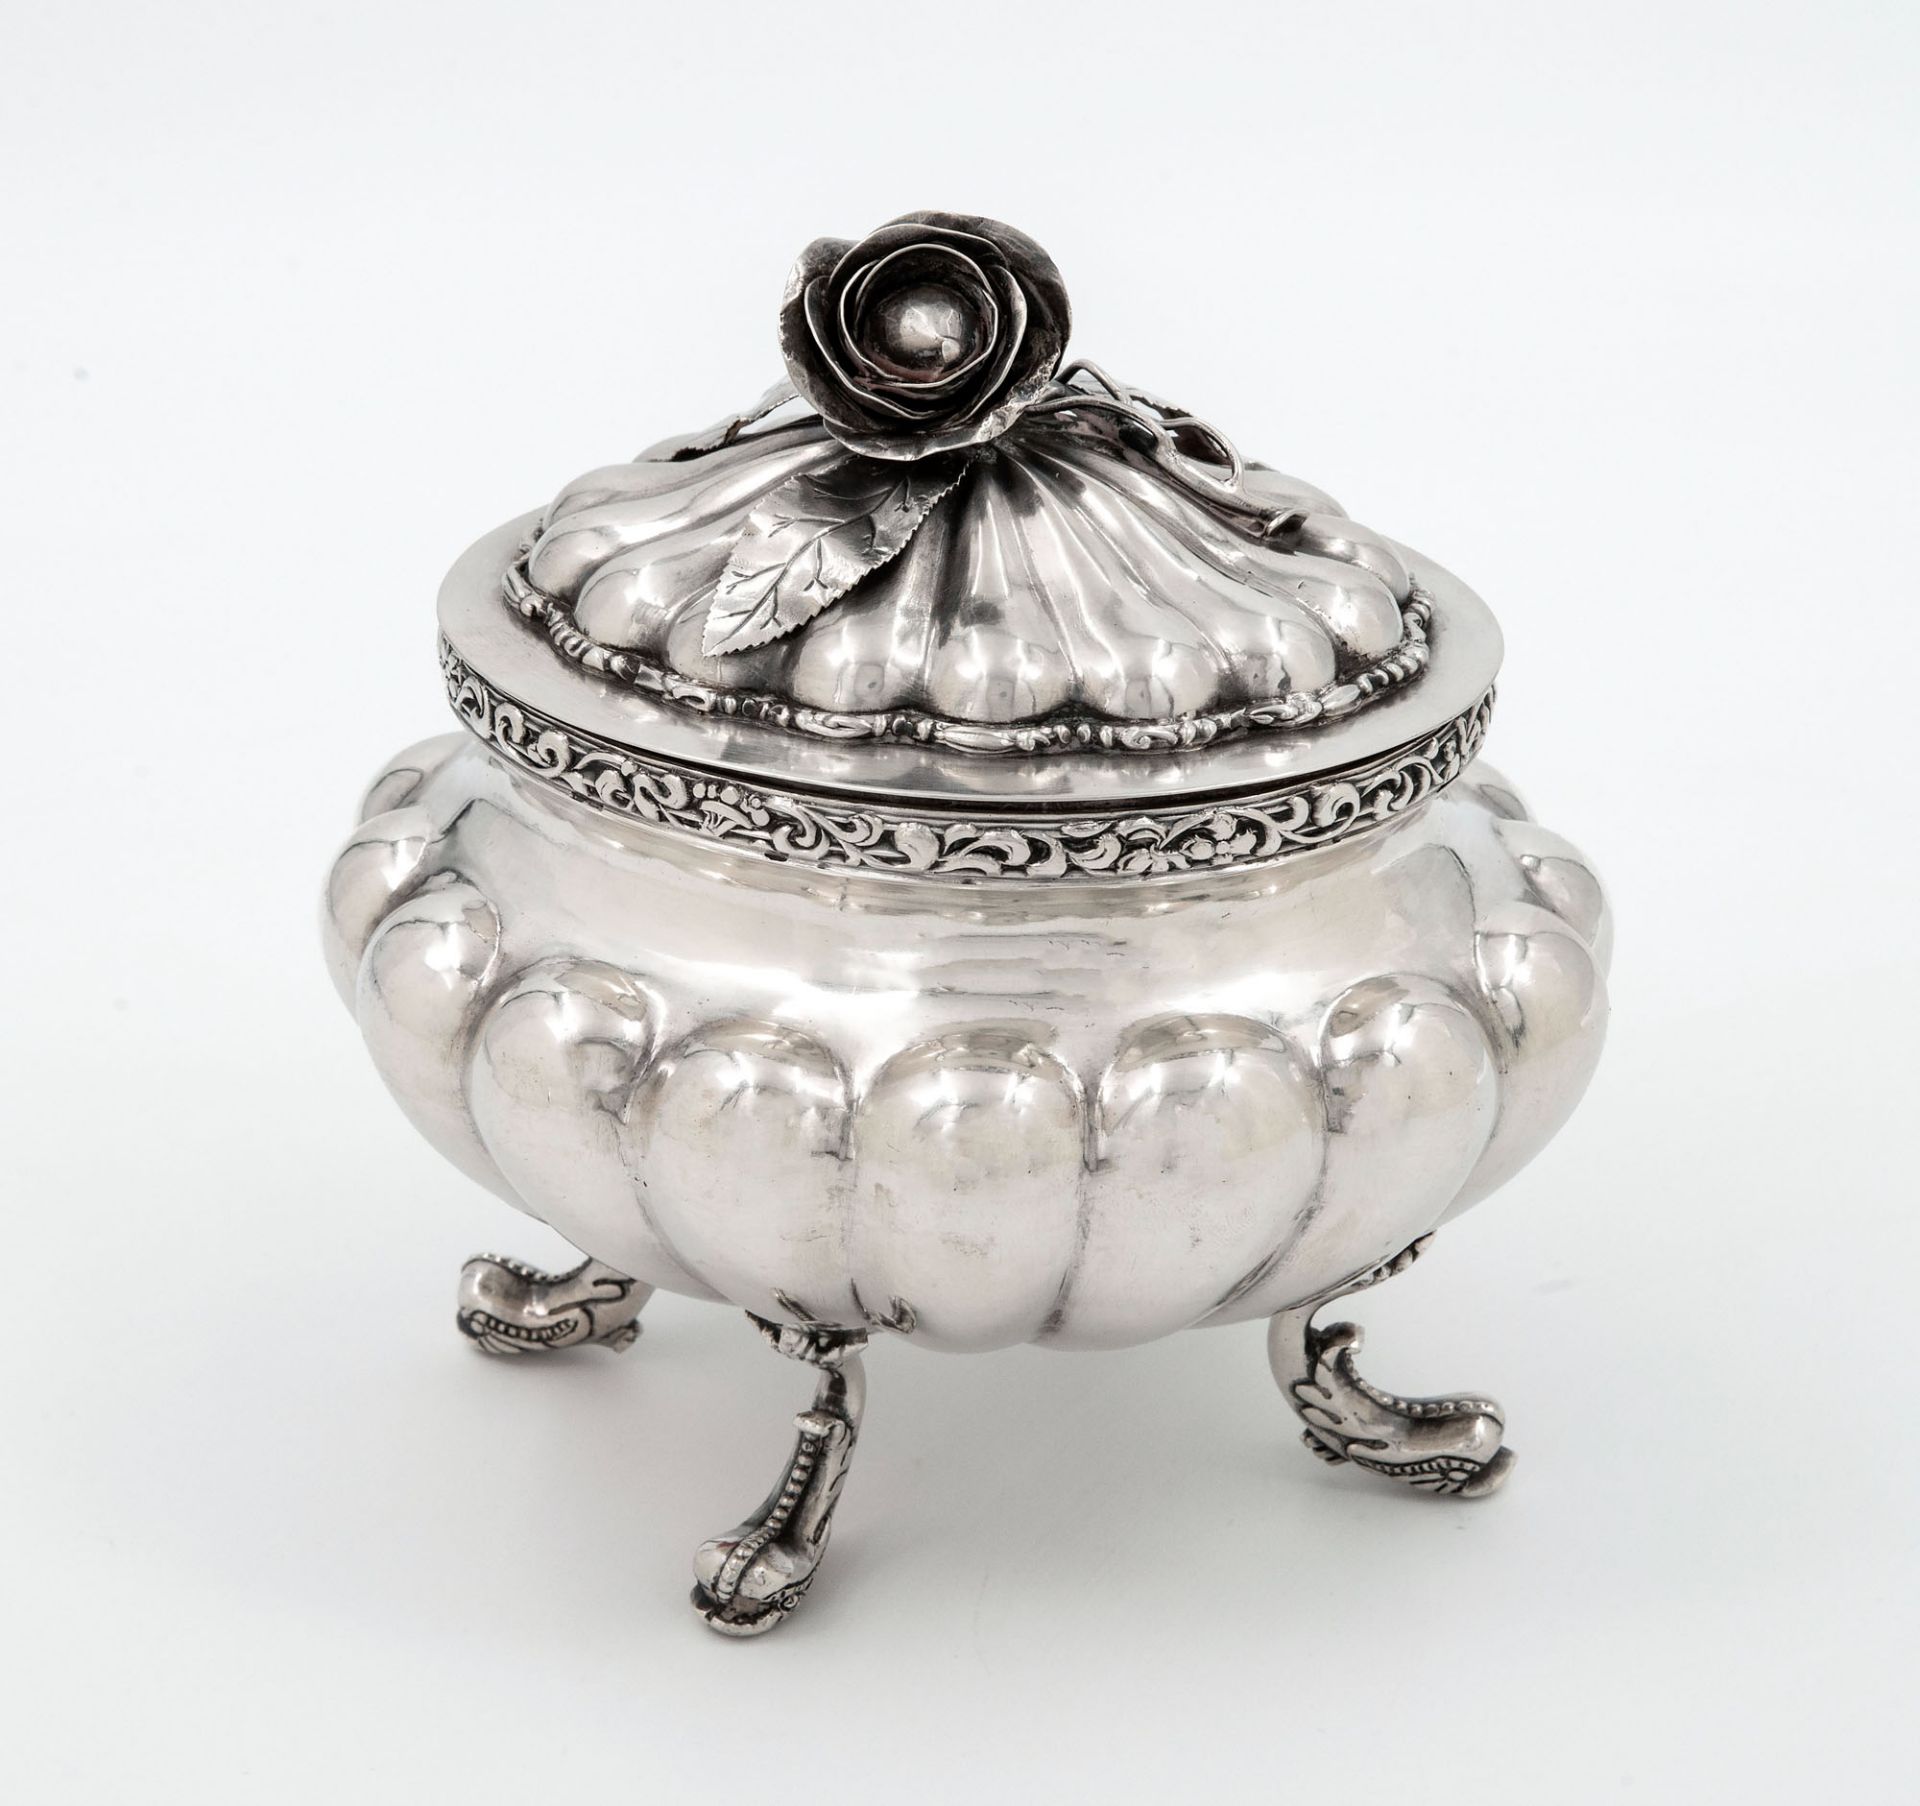 A Fine Silver Etrog Container, Austro-Hungary Early 19th Century